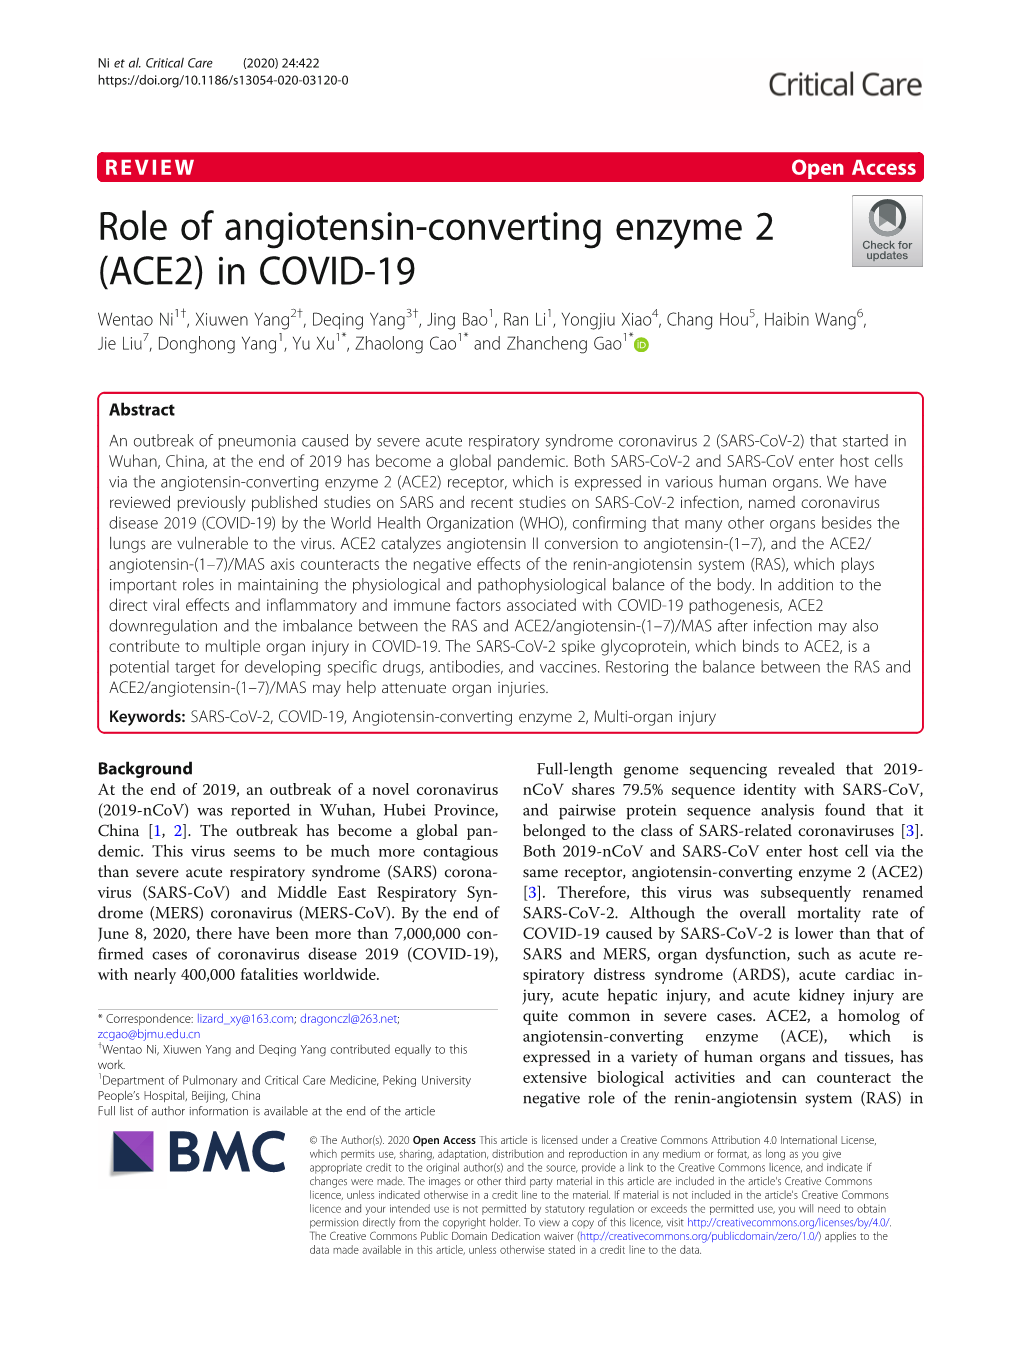 Role of Angiotensin-Converting Enzyme 2 (ACE2)